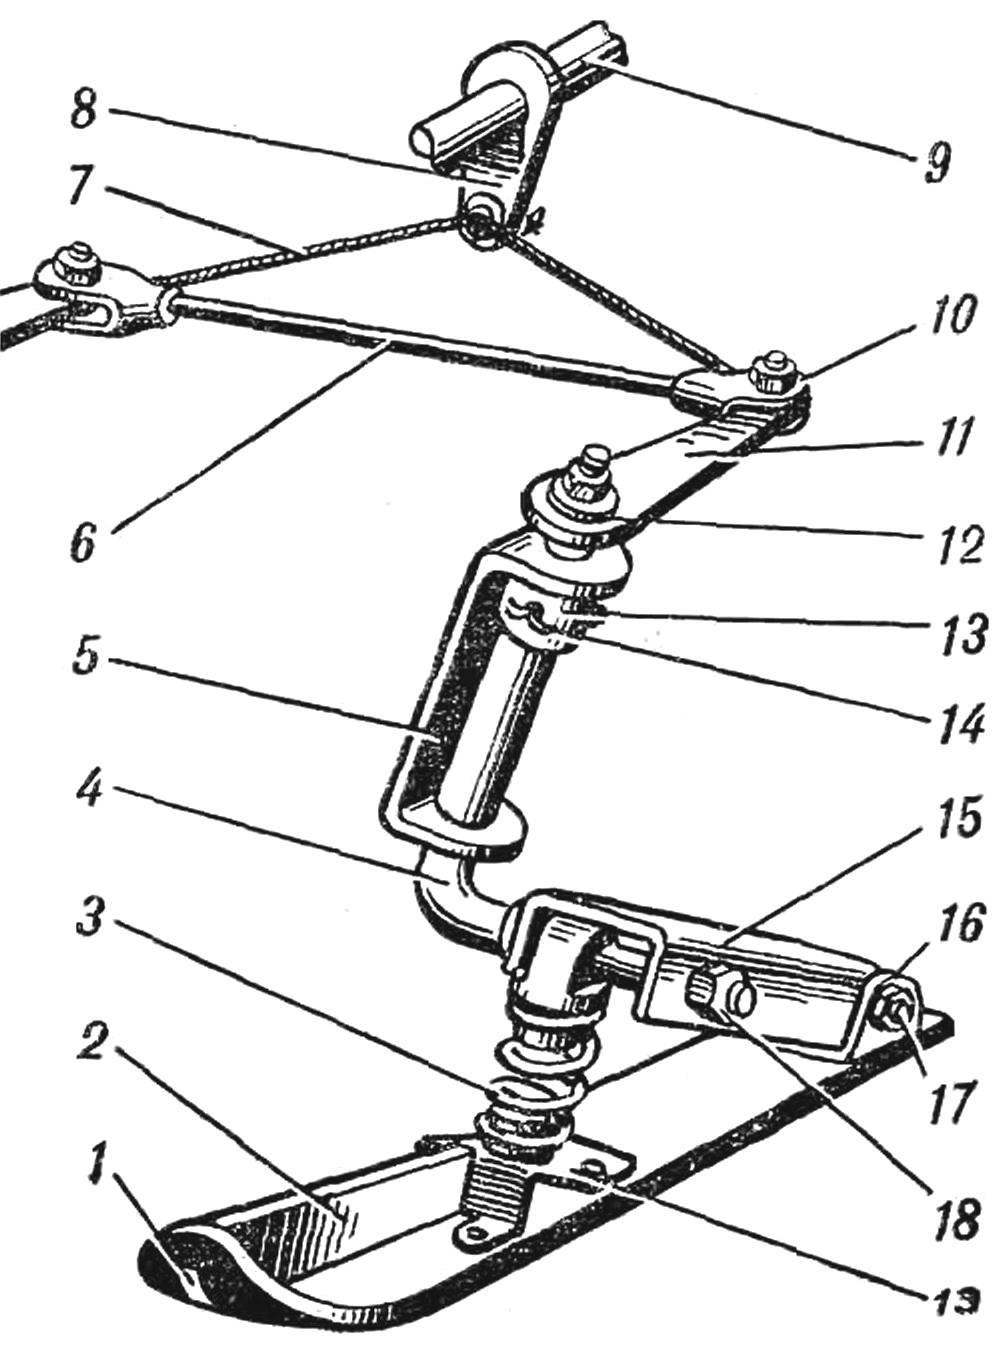 Fig. 3. The steering skis and its charms